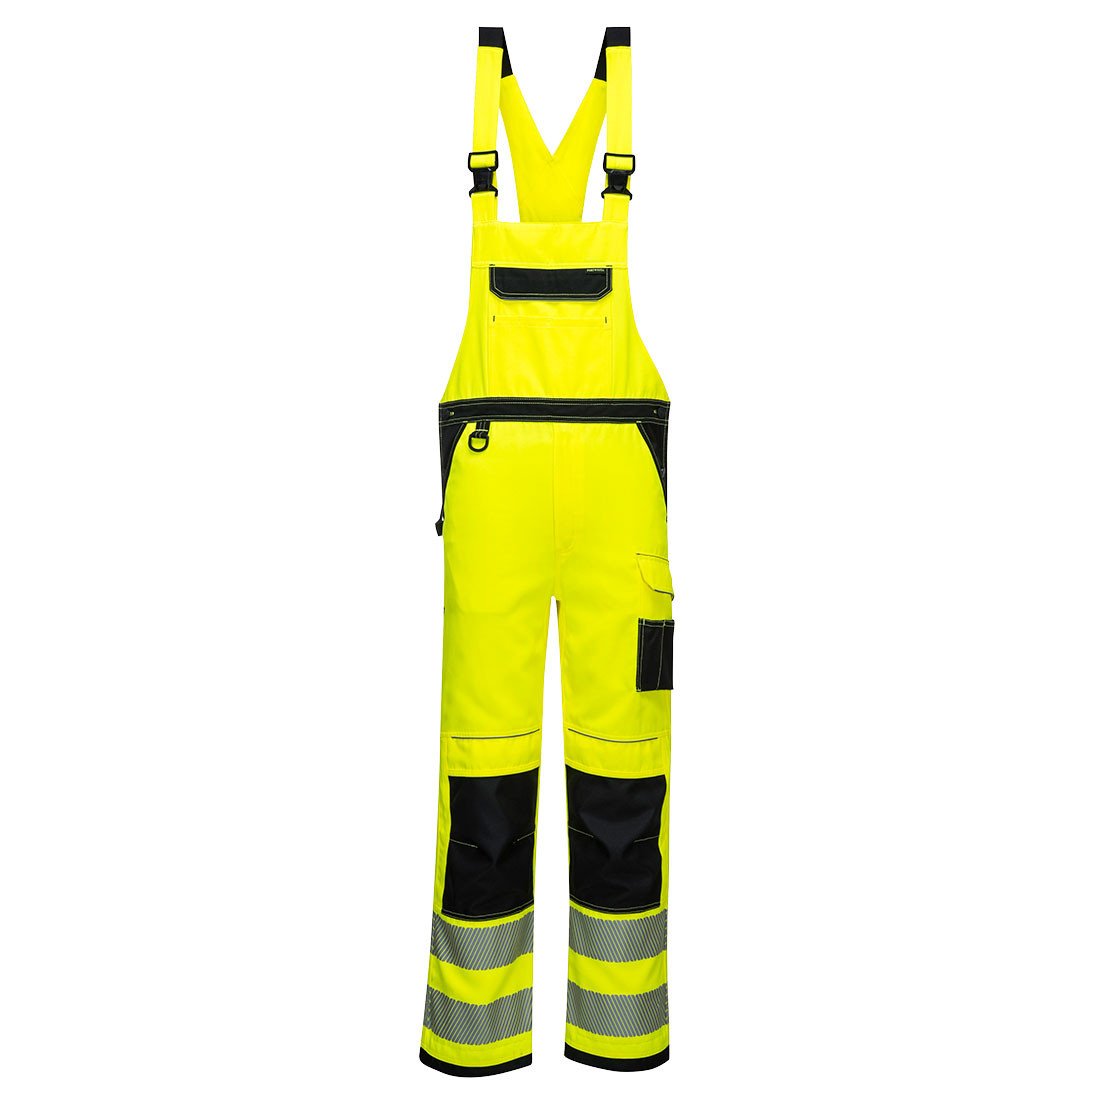 Portwest PW3 Hi Vis Bib and Brace Overall in Yellow Flourescent